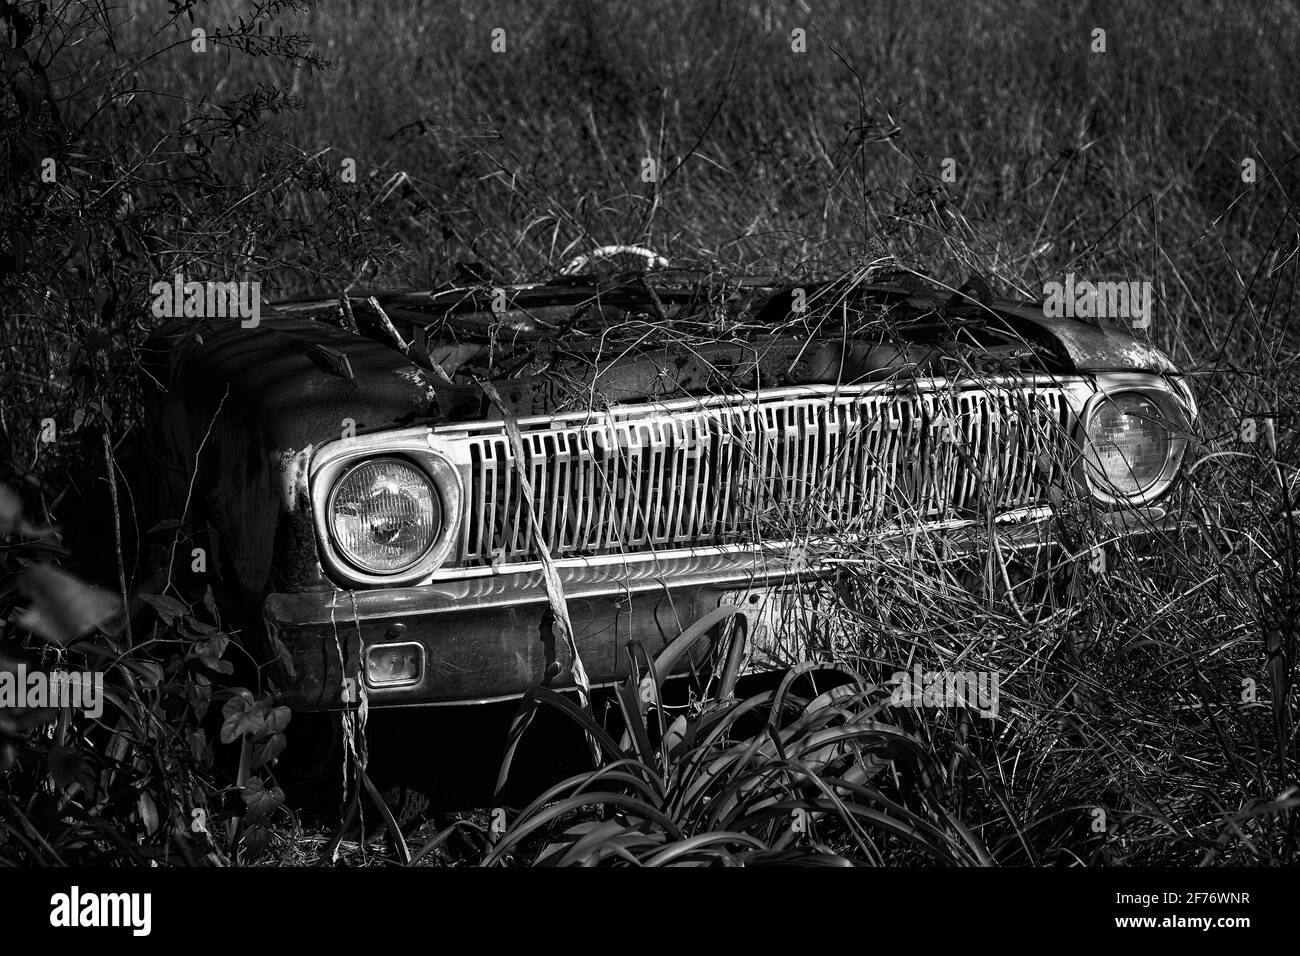 Black and white photograph of an antique car grill sitting in a field and being overgrown by vegetation Stock Photo